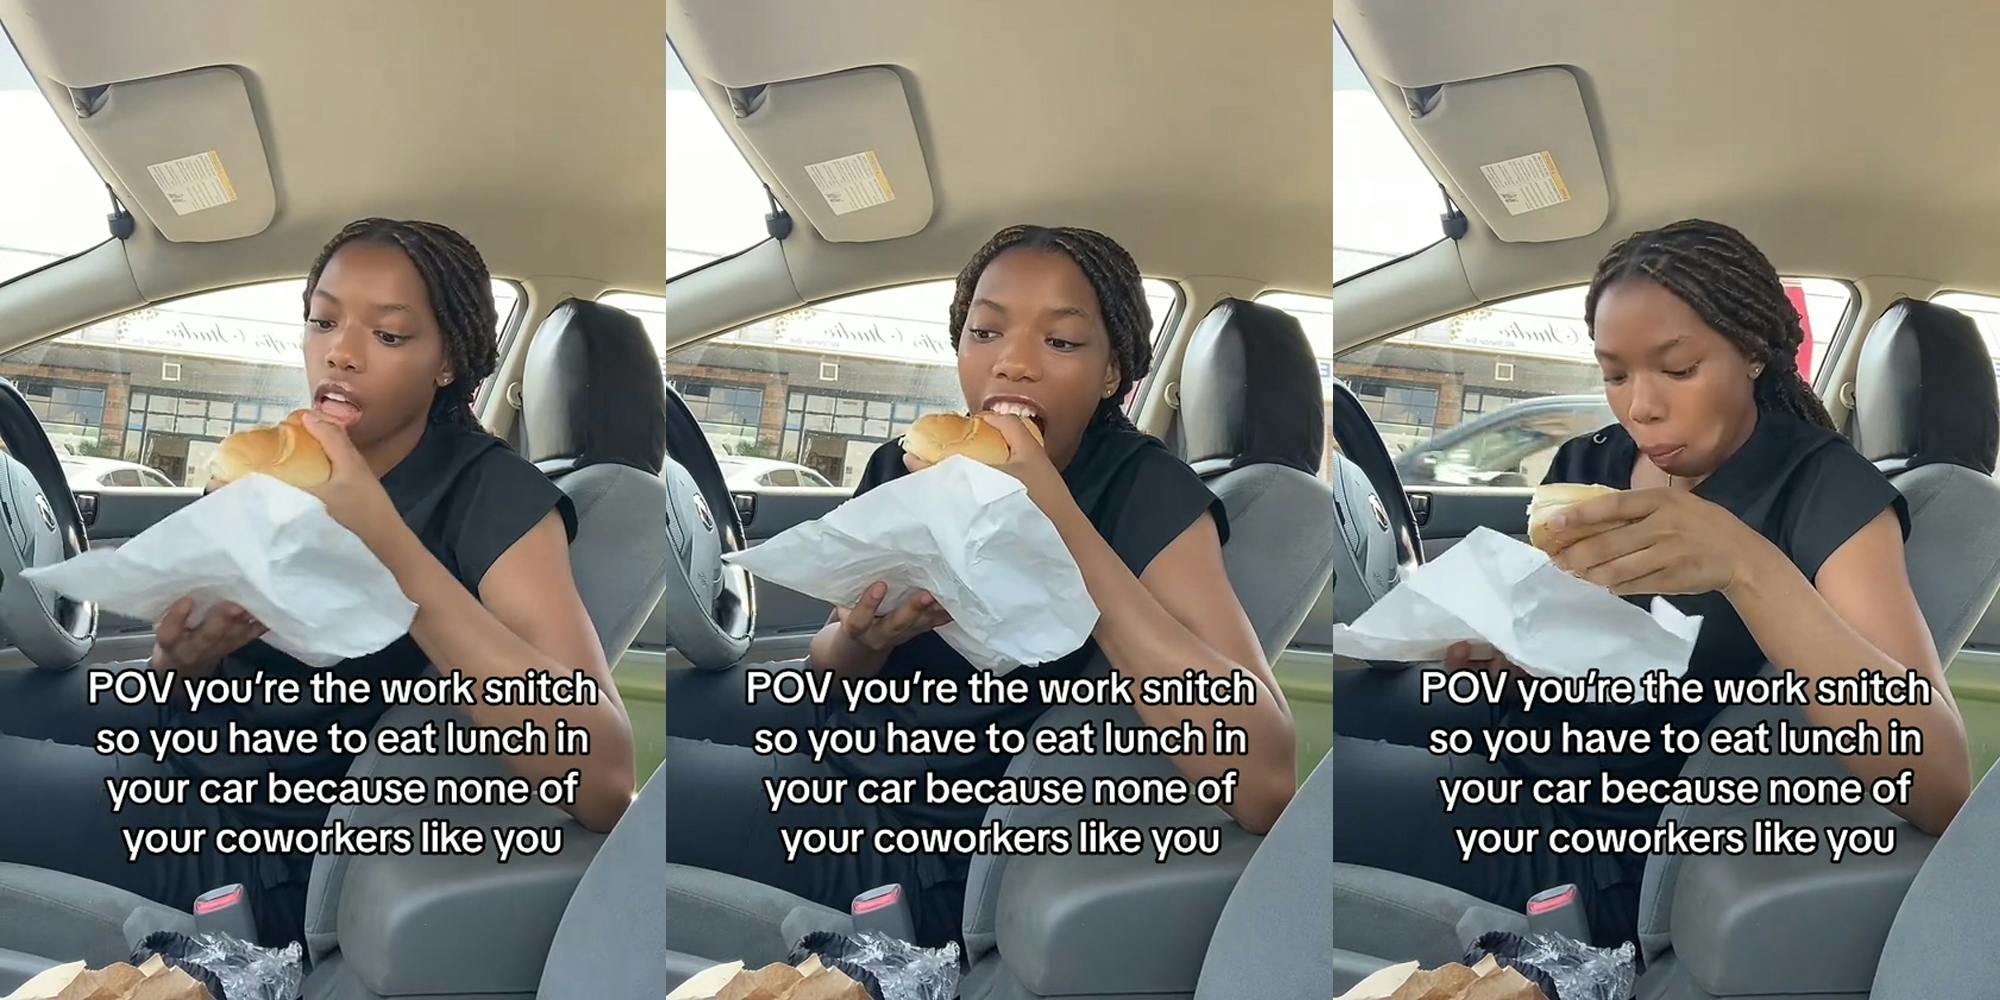 worker eating in car with caption "POV you're the work snitch so you have to eat lunch alone in your car because none of your coworkers like you" (l) worker eating in car with caption "POV you're the work snitch so you have to eat lunch alone in your car because none of your coworkers like you" (c) worker eating in car with caption "POV you're the work snitch so you have to eat lunch alone in your car because none of your coworkers like you" (r)